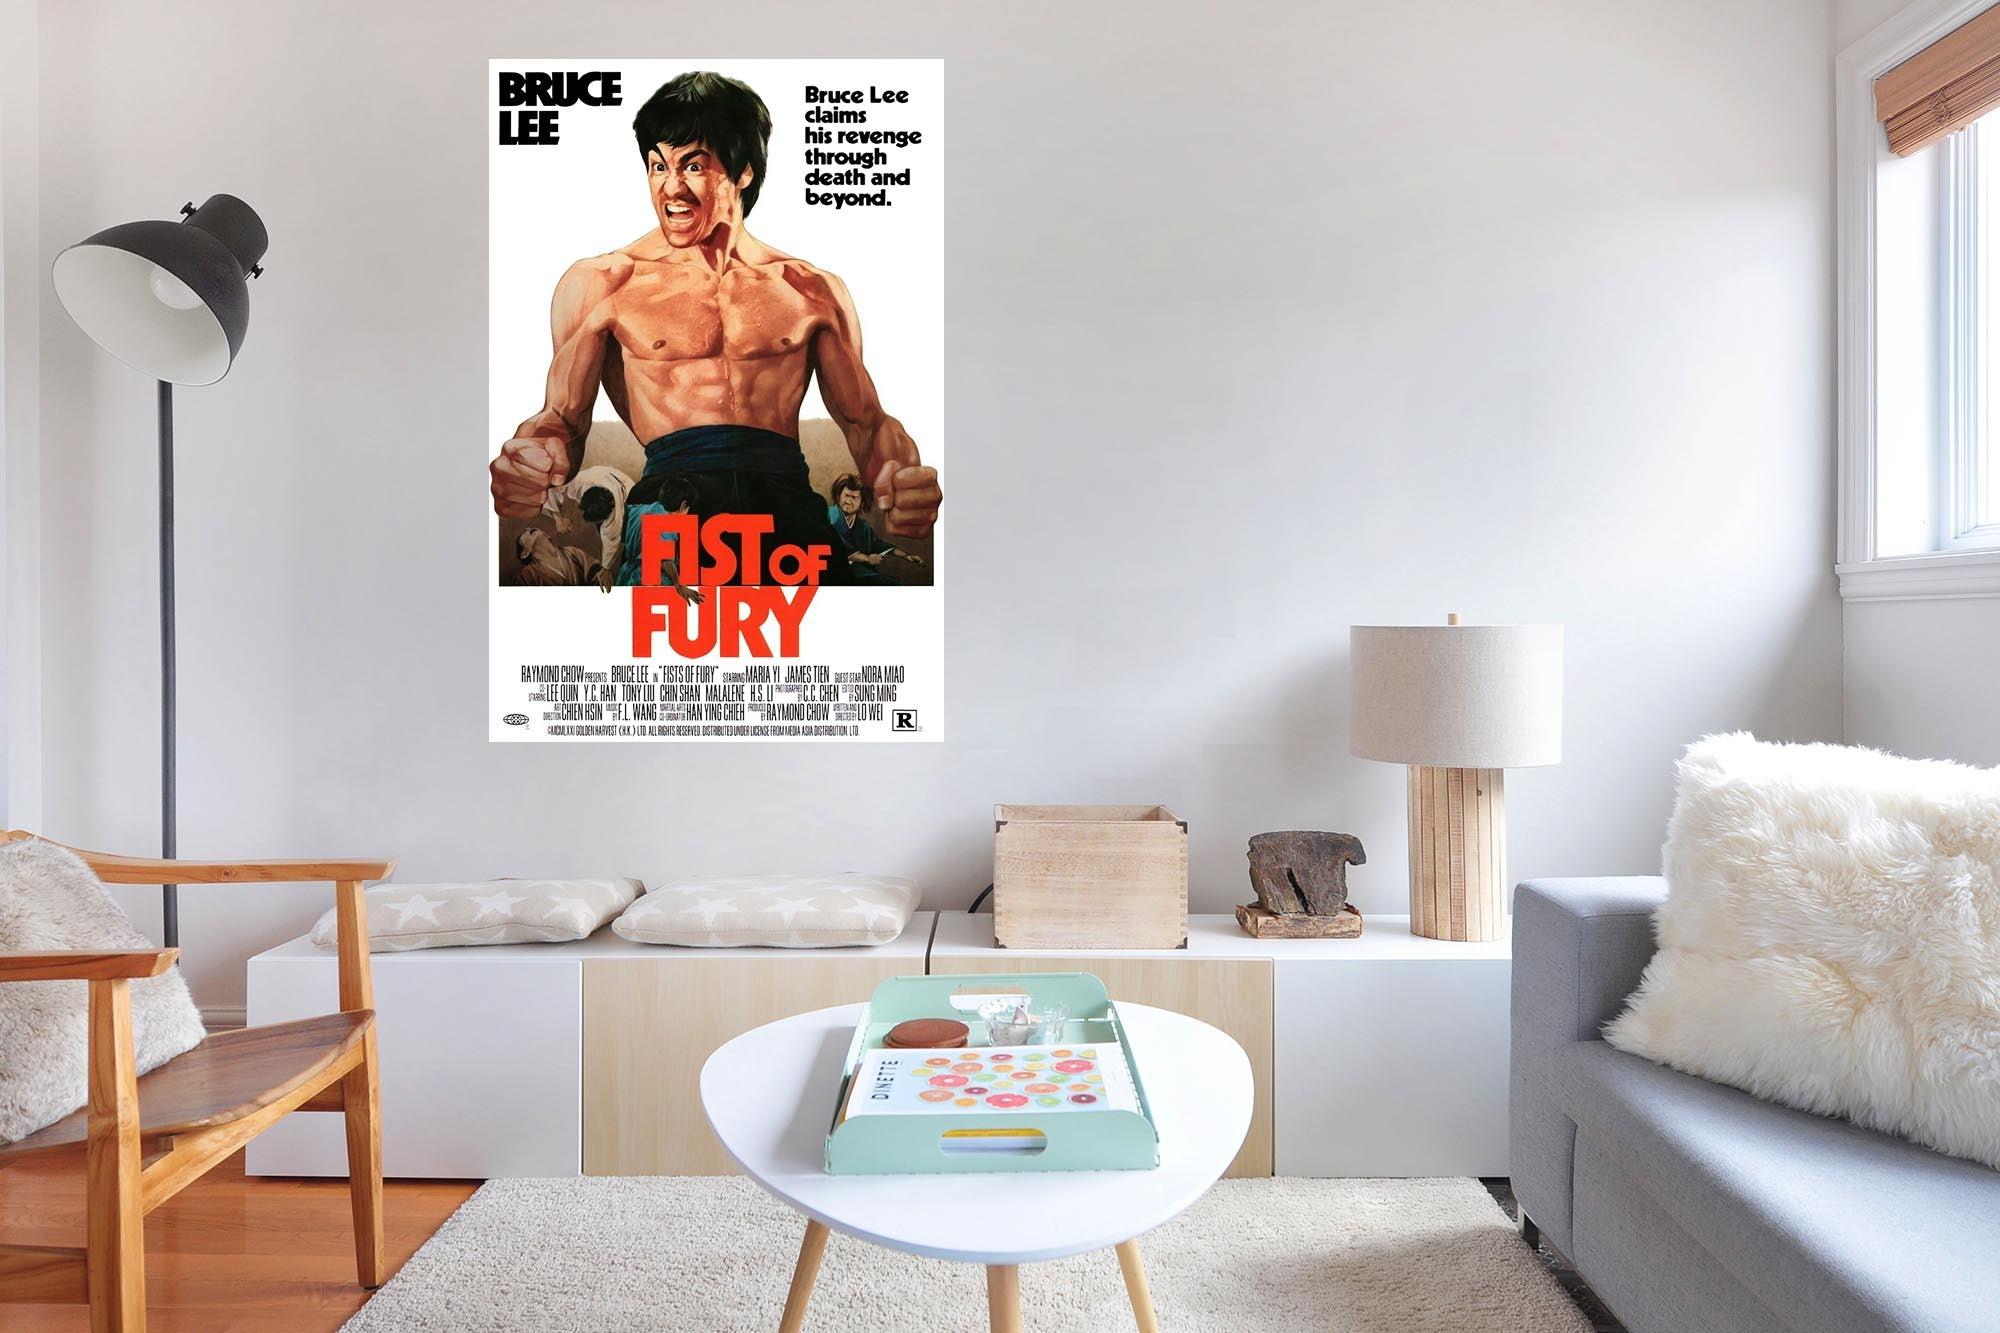 CoolWalls.ca Posters, Prints, & Visual Artwork Bruce Lee Firsts of Fury Movie Poster Vintage Artwork: Peel_n_Stick onto the wall, wallpaper like fabric